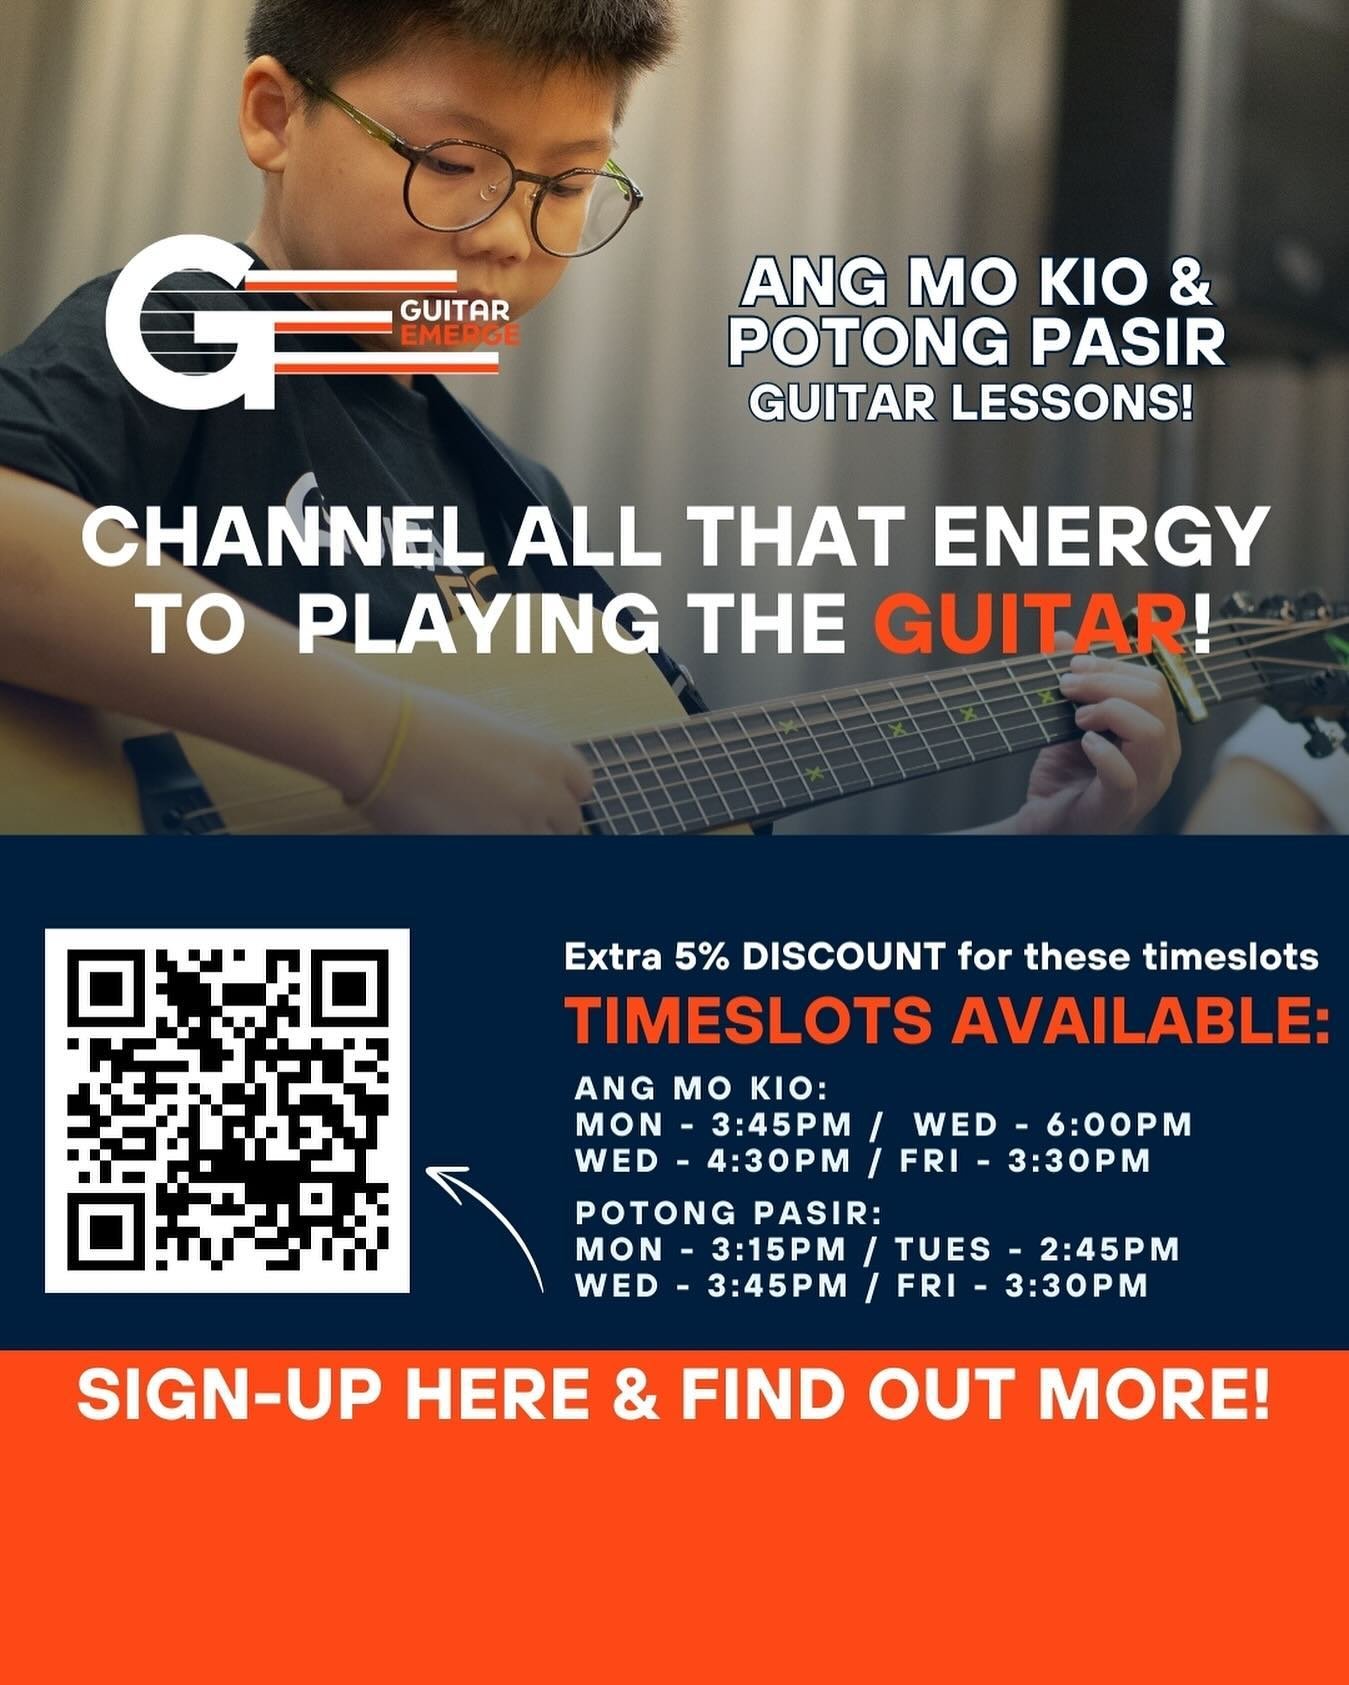 Looking for an avenue to help explore your child&rsquo;s/ your interests? Try Guitar Lessons with us! We are looking for students who are totally new to the guitar! We are running a special promo of FREE GUITAR for new sign-ups! Our lessons are 1 TO 